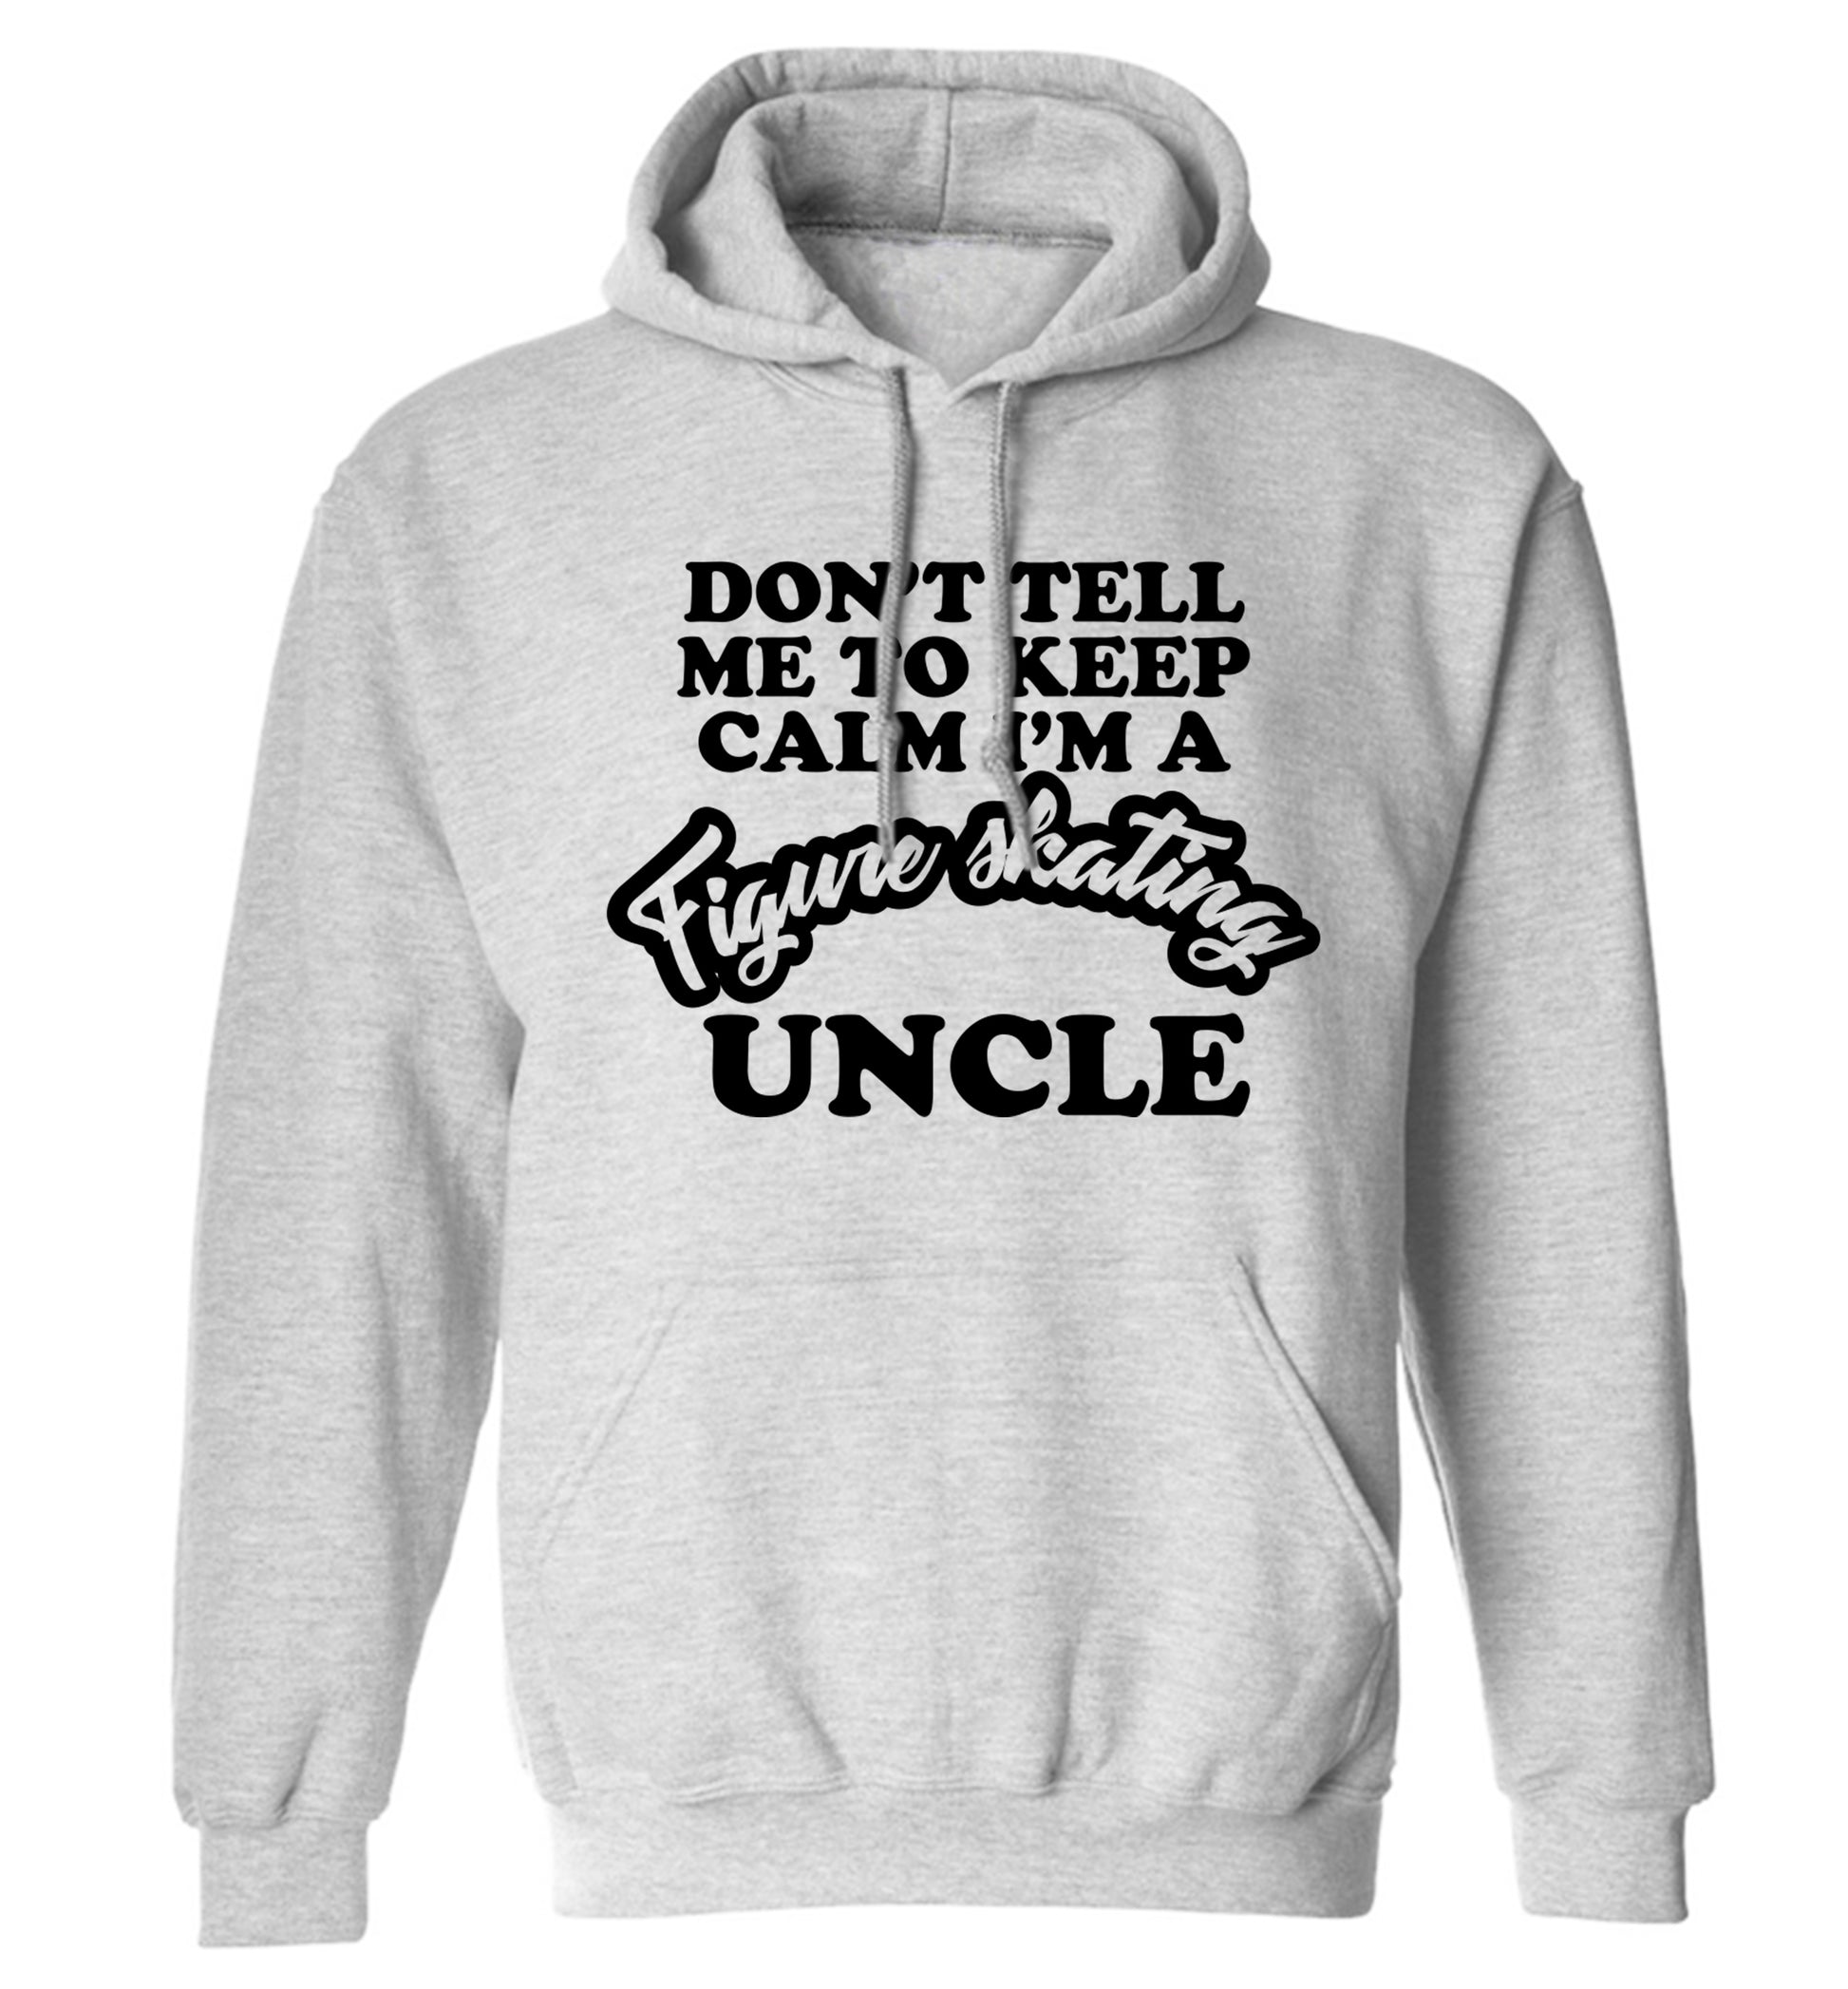 Don't tell me to keep calm I'm a figure skating uncle adults unisexgrey hoodie 2XL